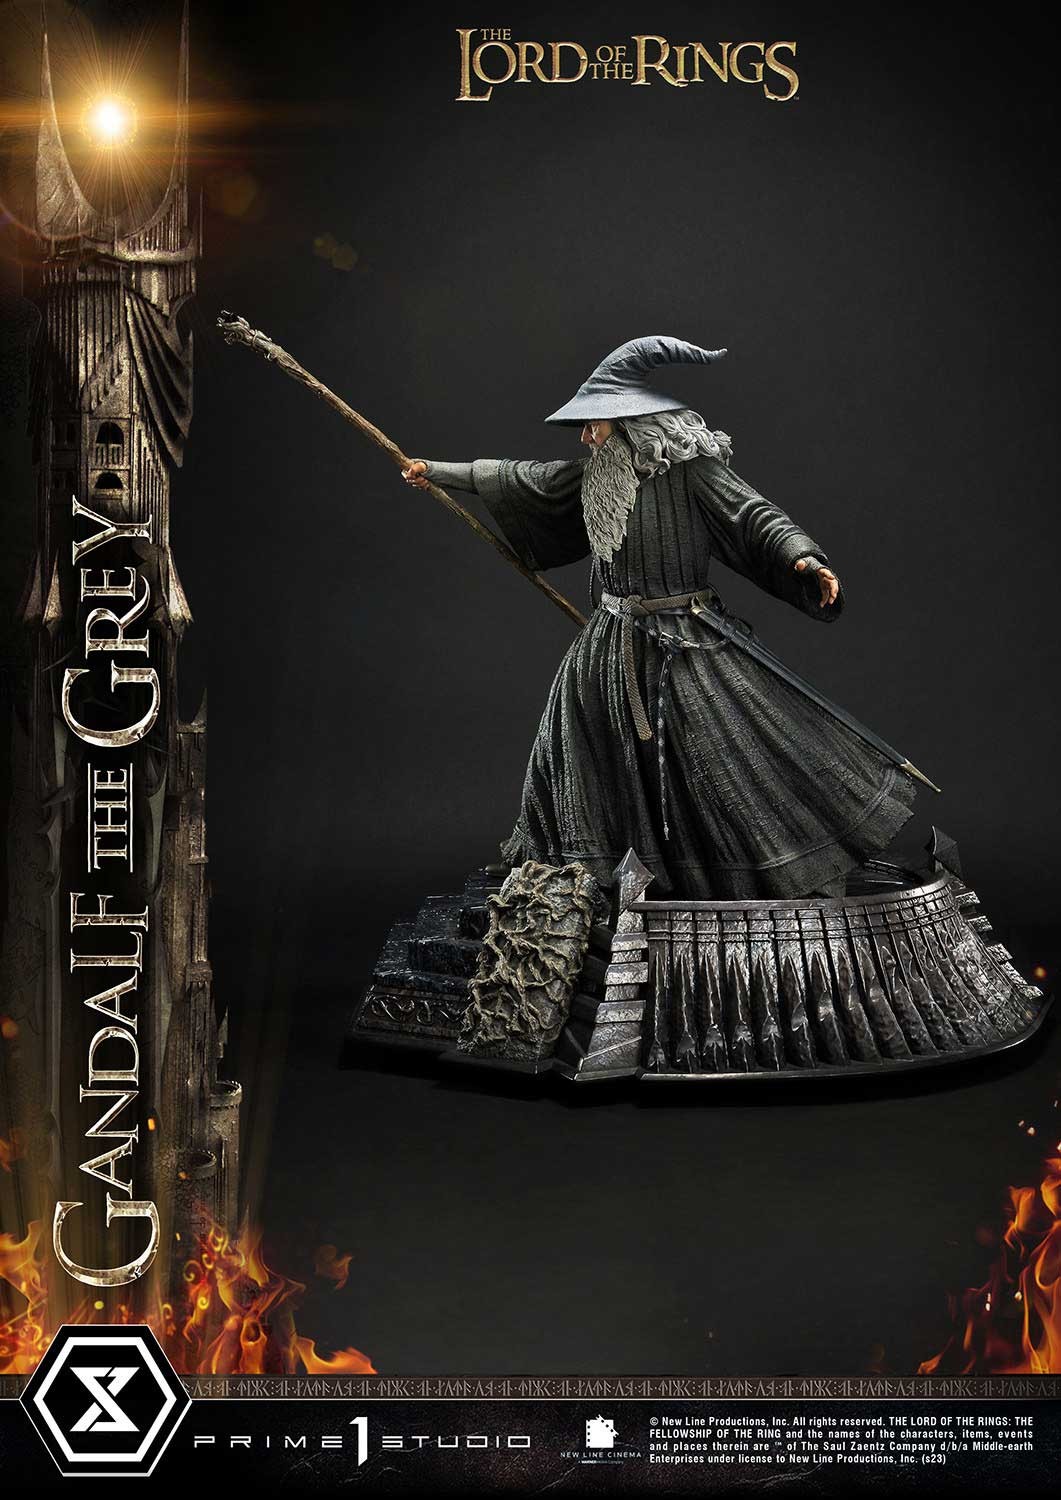 GANDALF THE GREY 1/4 Scale Statue Gandalf-the-grey_the-lord-of-the-rings_gallery_64c40682ac85a